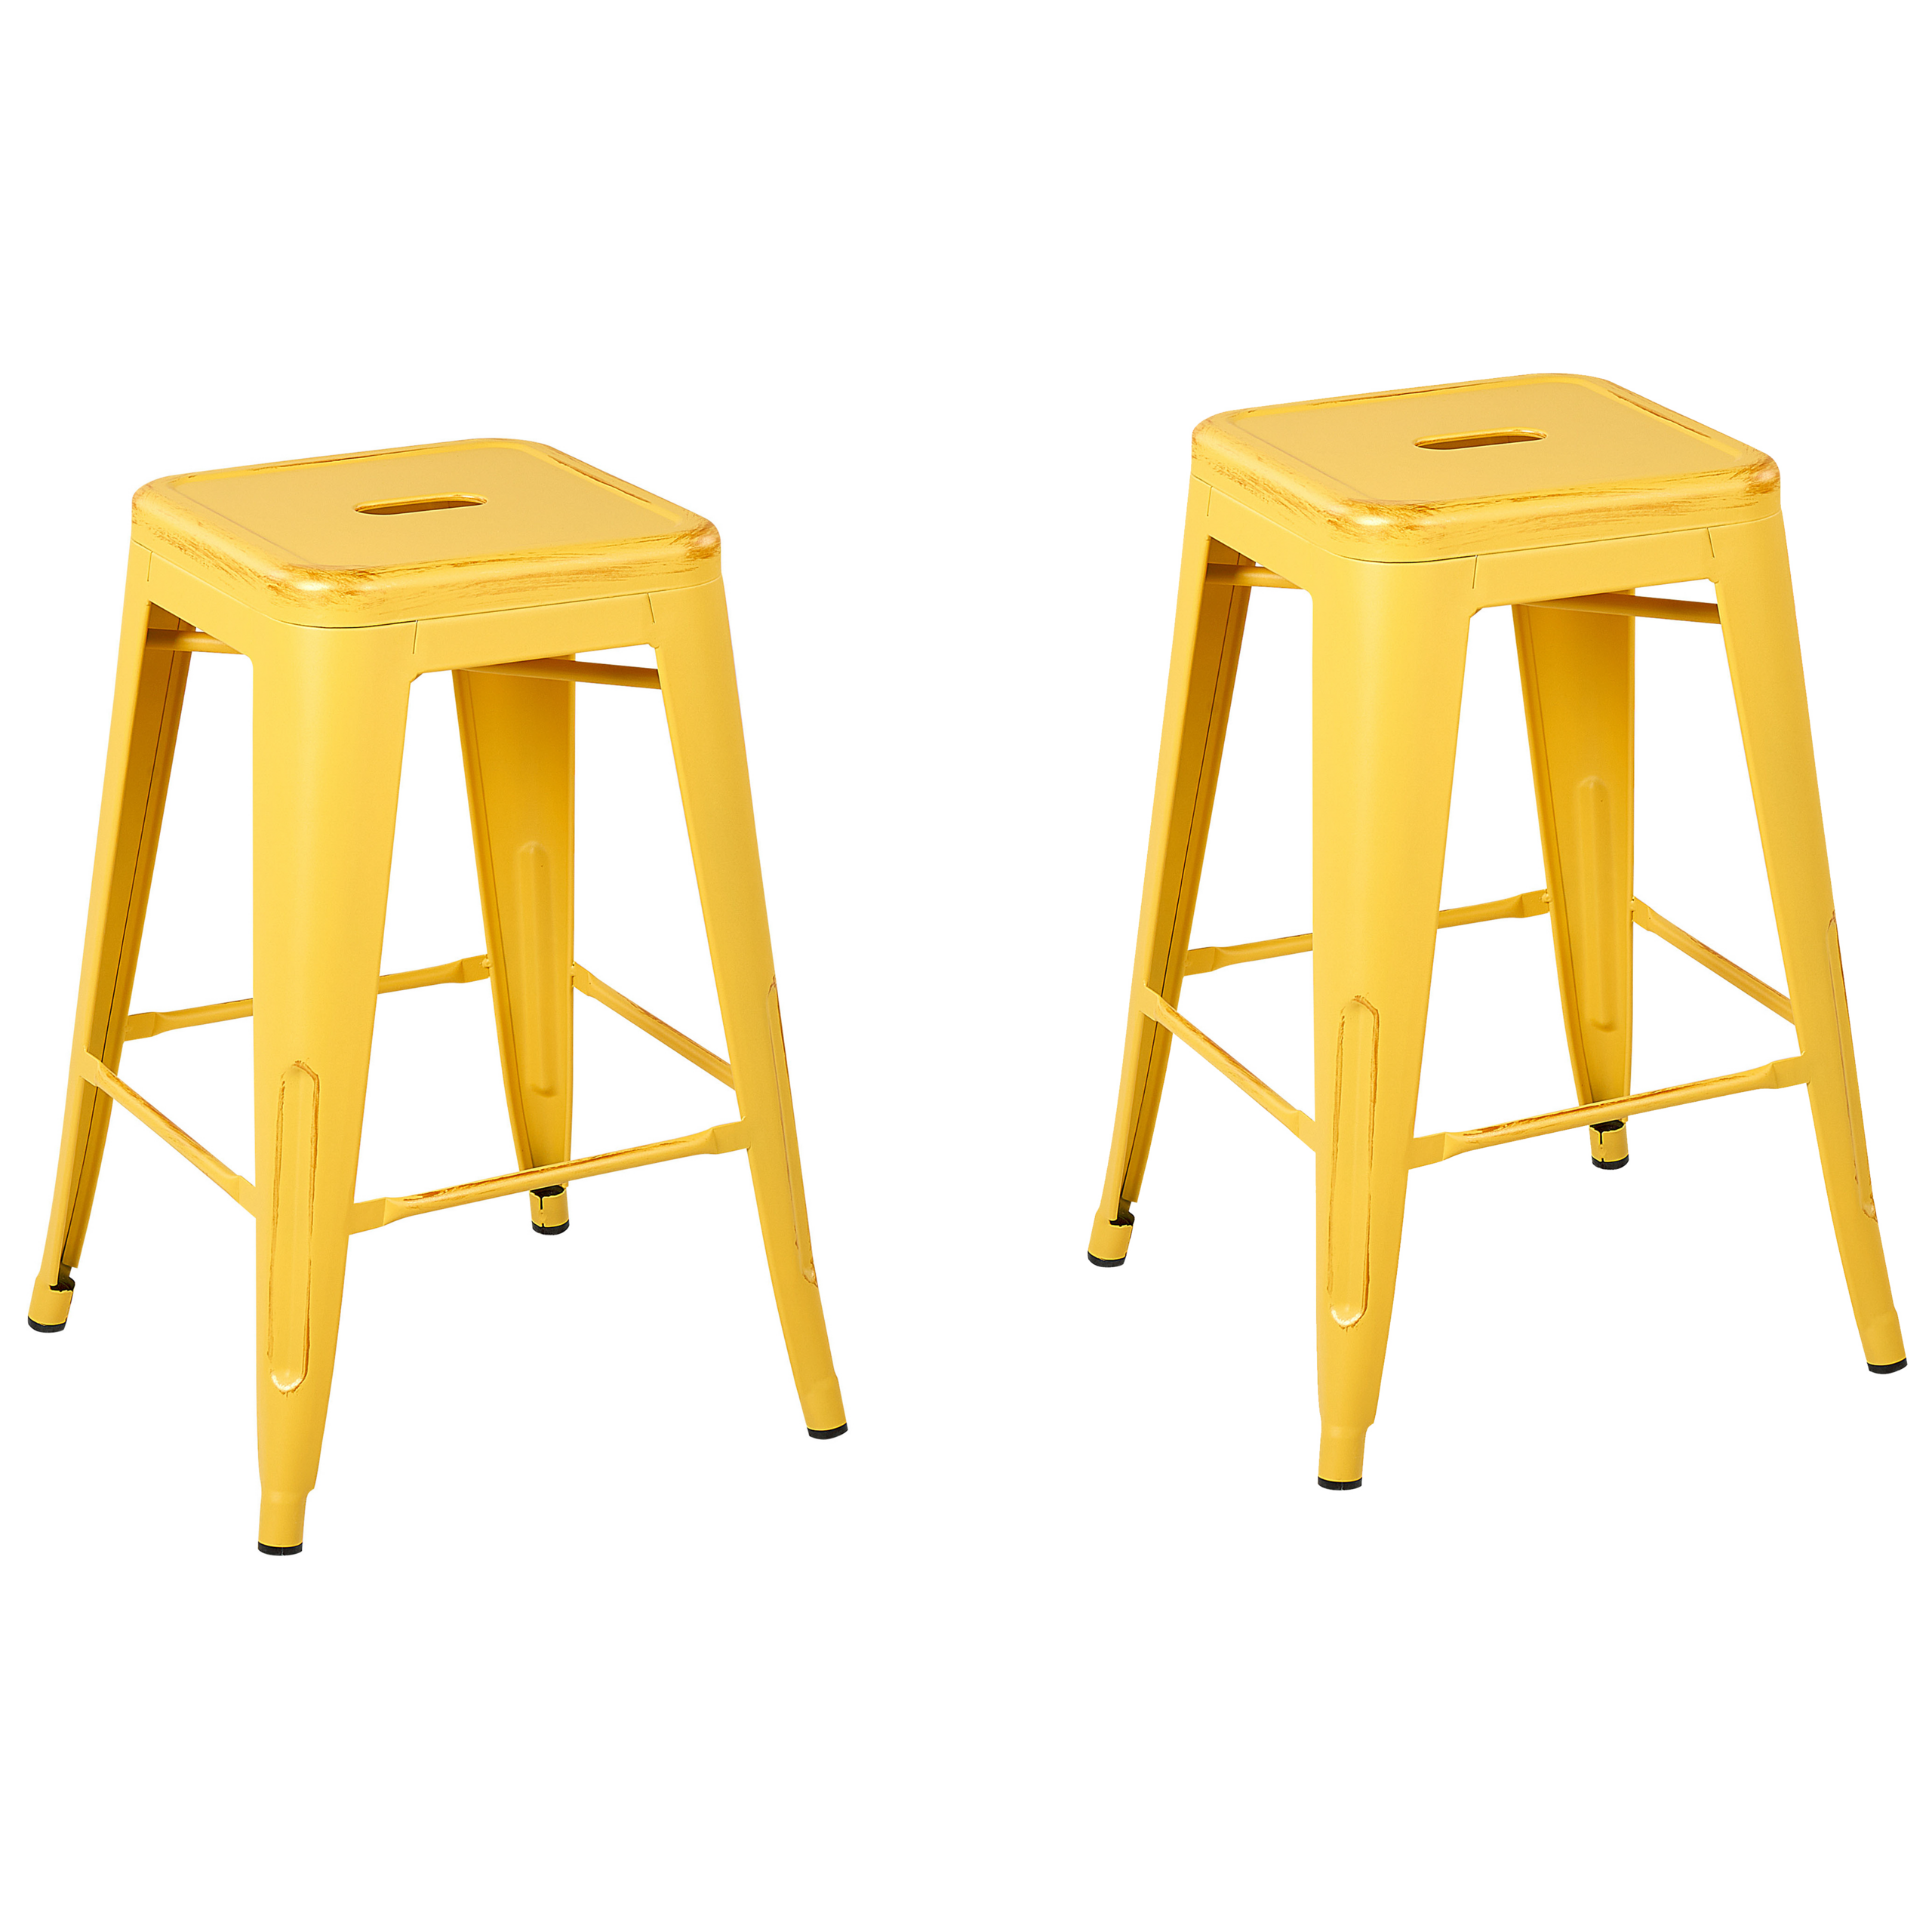 Beliani Set of 2 Bar Stools Yellow with Gold Metal 60 cm Stackable Counter Height Industrial